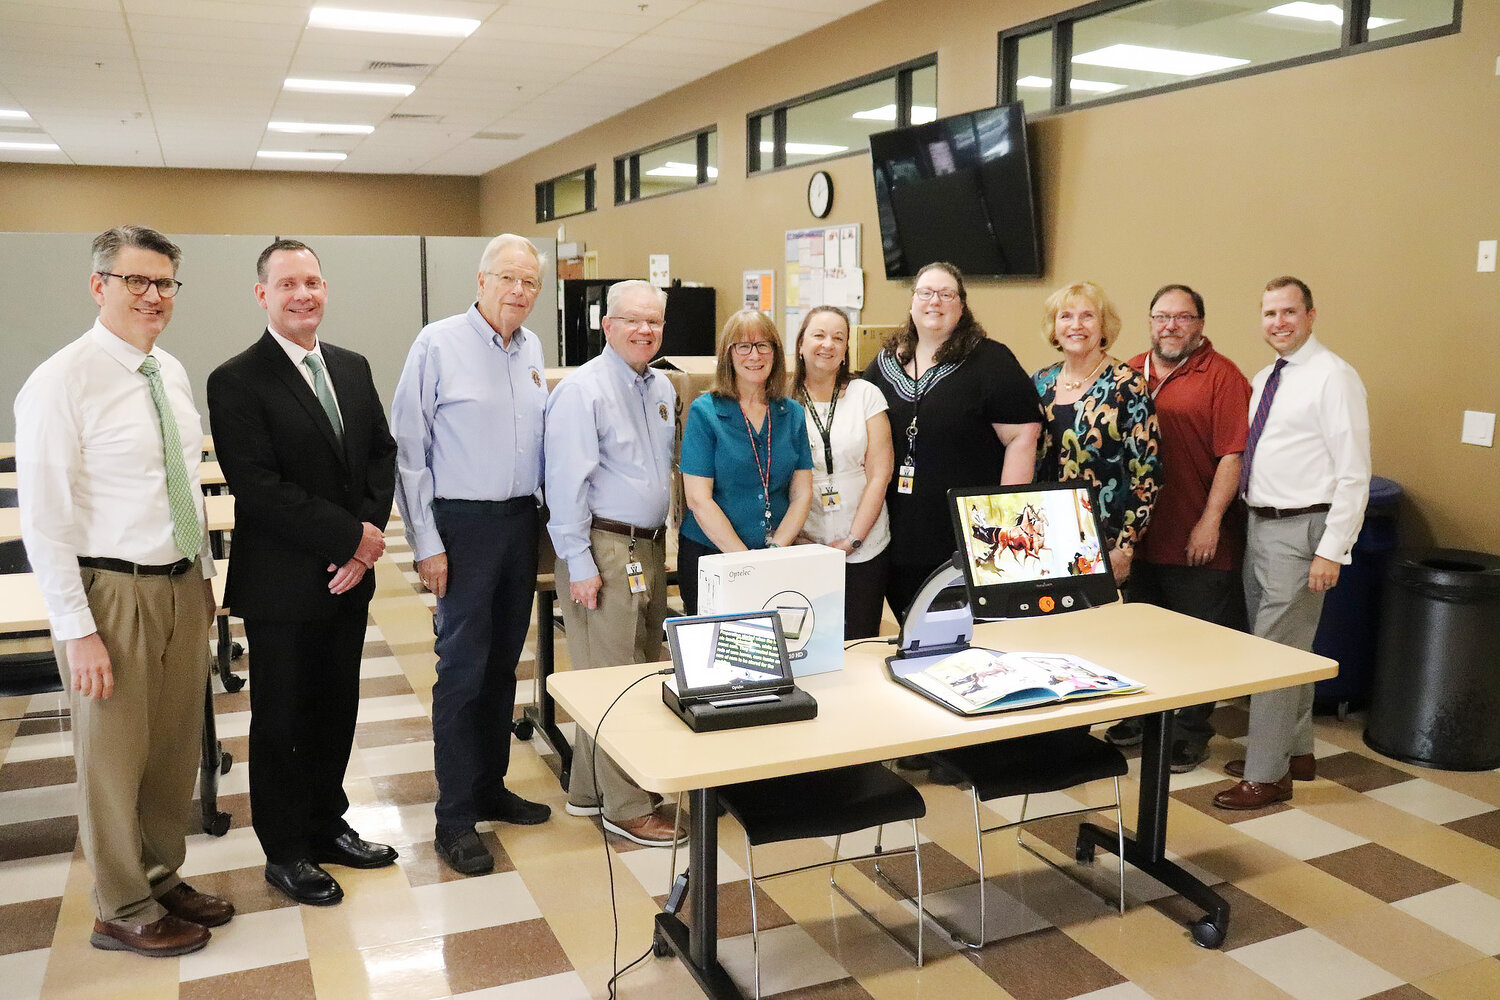 The Salisbury Lions Club donated $23,000 worth of magnifiers to Wicomico Public Schools. It included four Reveal 16 Digital Desk Magnifiers for students with sight loss or low vision as a comfortable reading and writing aid.